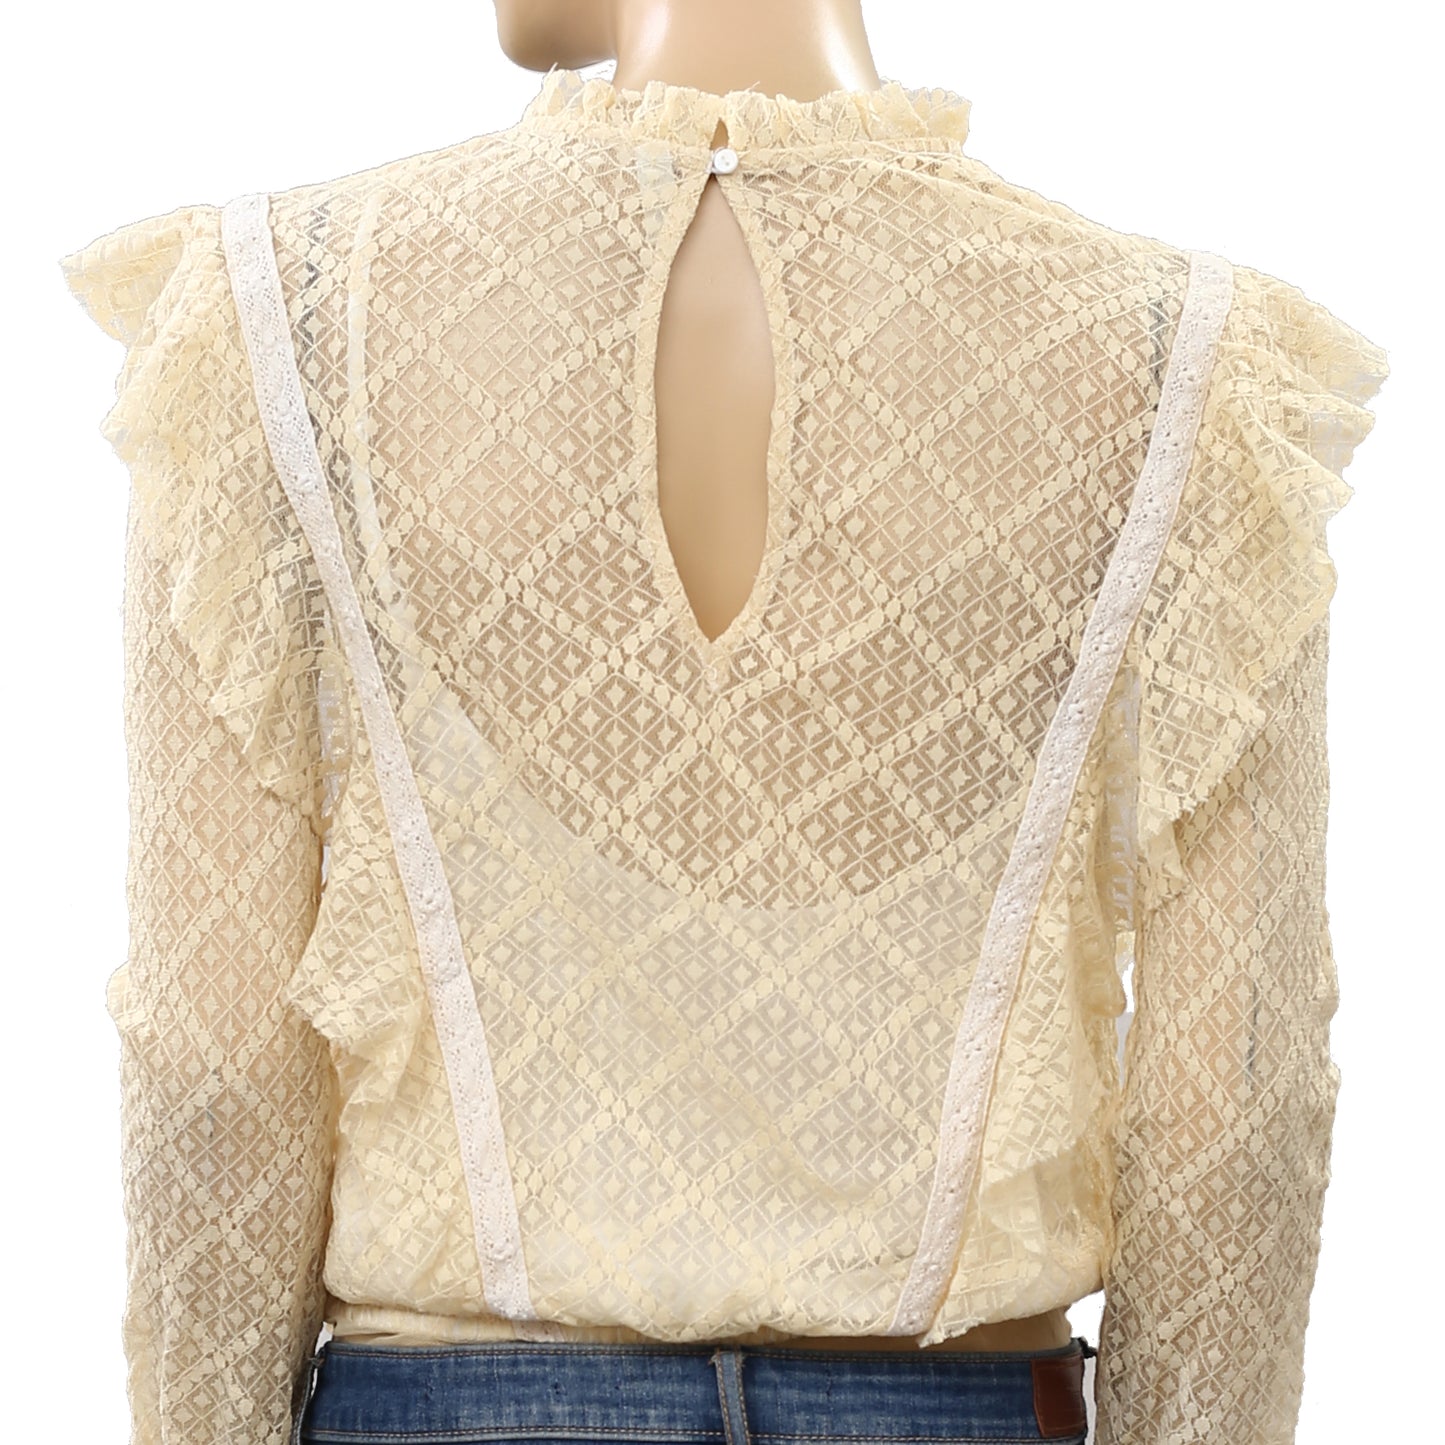 Intimately Free People Goldie Ruffle Lace Bodysuit Top